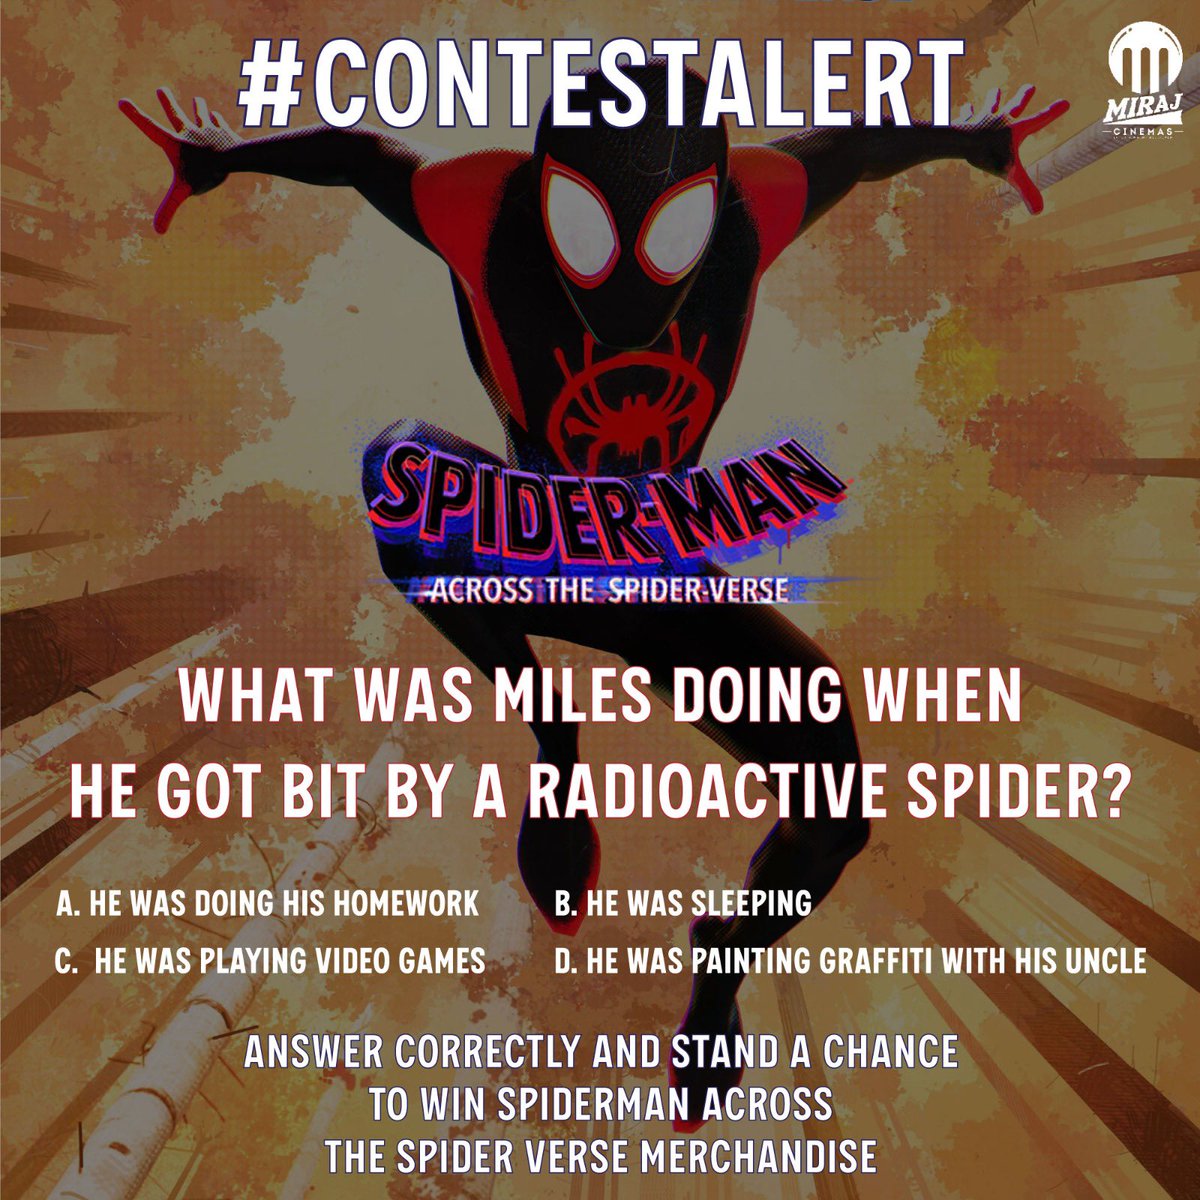 Attention people!! It’s your favourite SpiderMan in the house!! #ContestAlert We have something that will get you excited!! Answer all the questions and 5 lucky winners stand a chance to win #SpiderManAcrossTheSpiderVerse merchandise. To participate: 1. Follow us